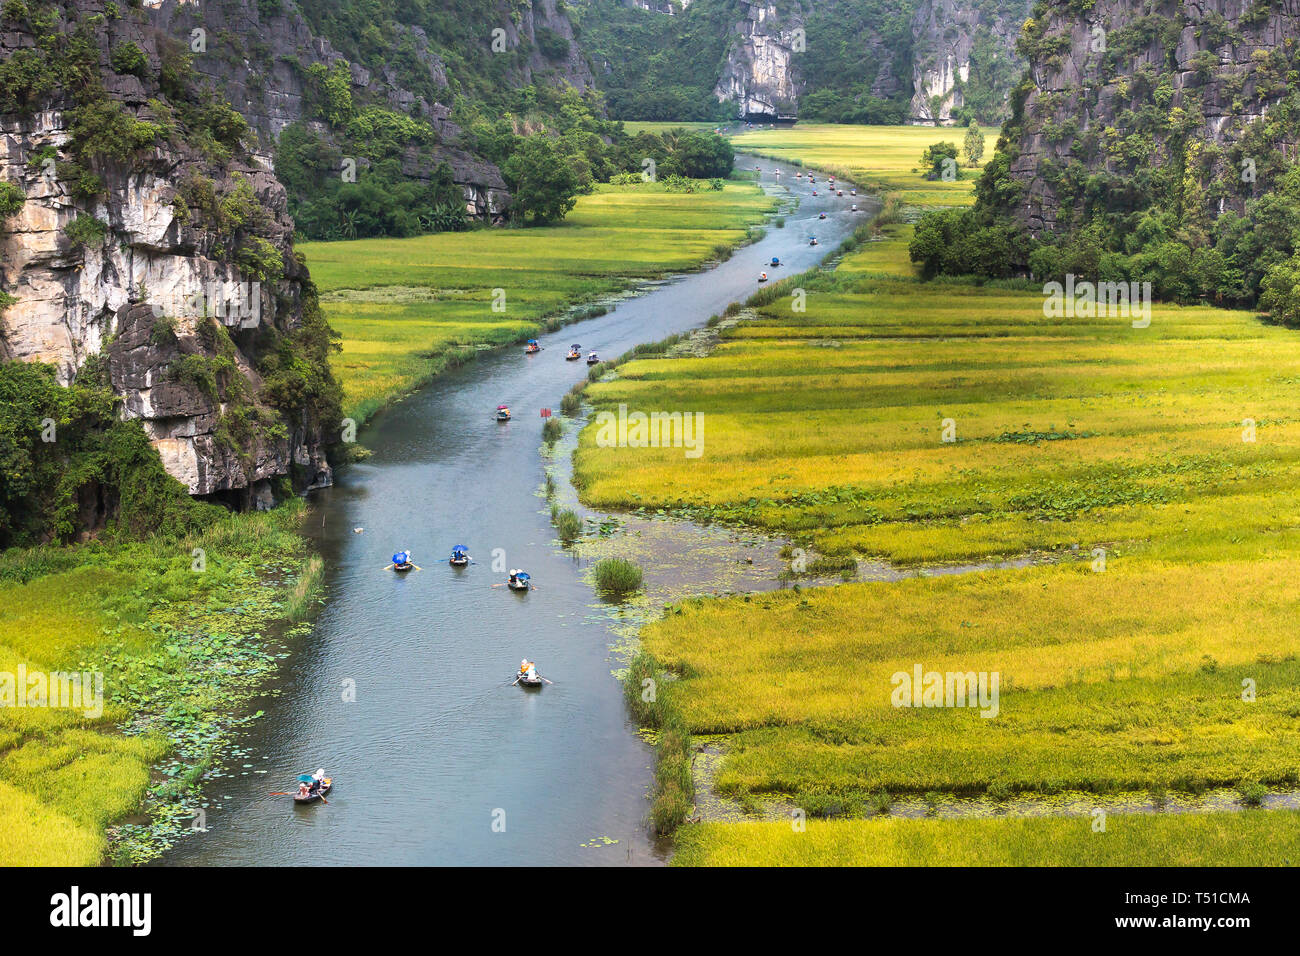 the majestic scenery on Ngo Dong river in Tam Coc Bich Dong view from the mountain top in Ninh Binh province of Viet Nam Stock Photo